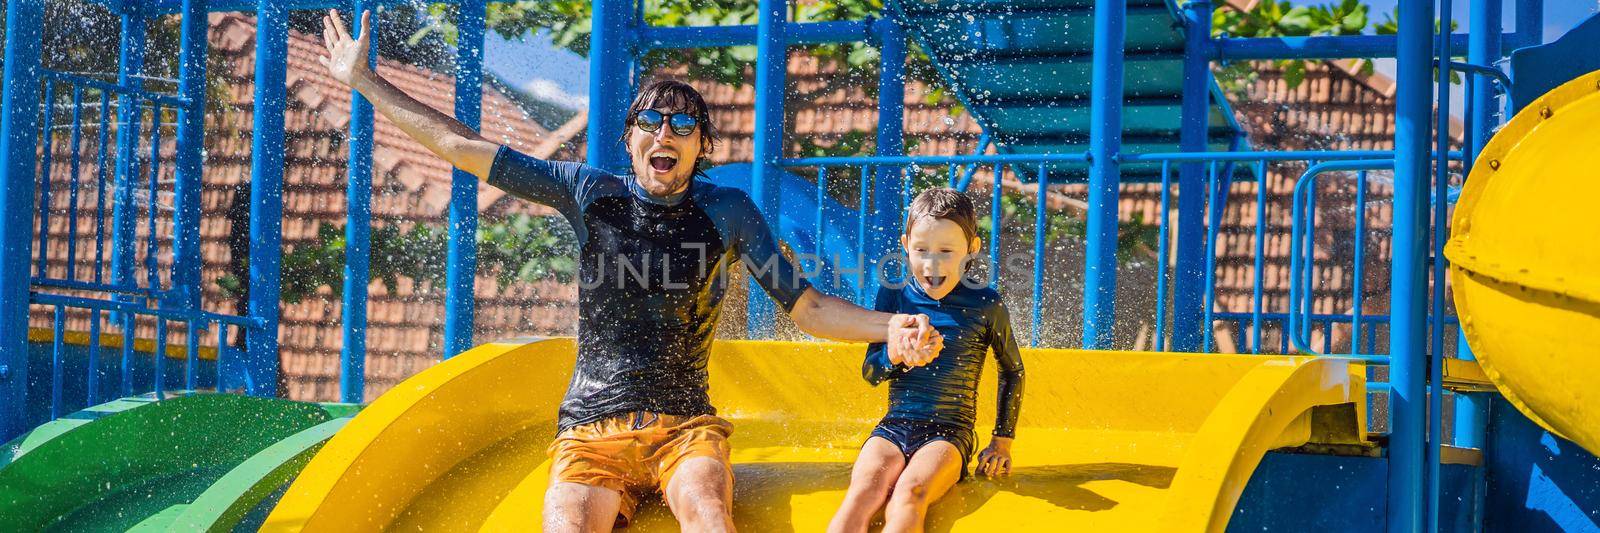 Father and son on a water slide in the water park BANNER, LONG FORMAT by galitskaya